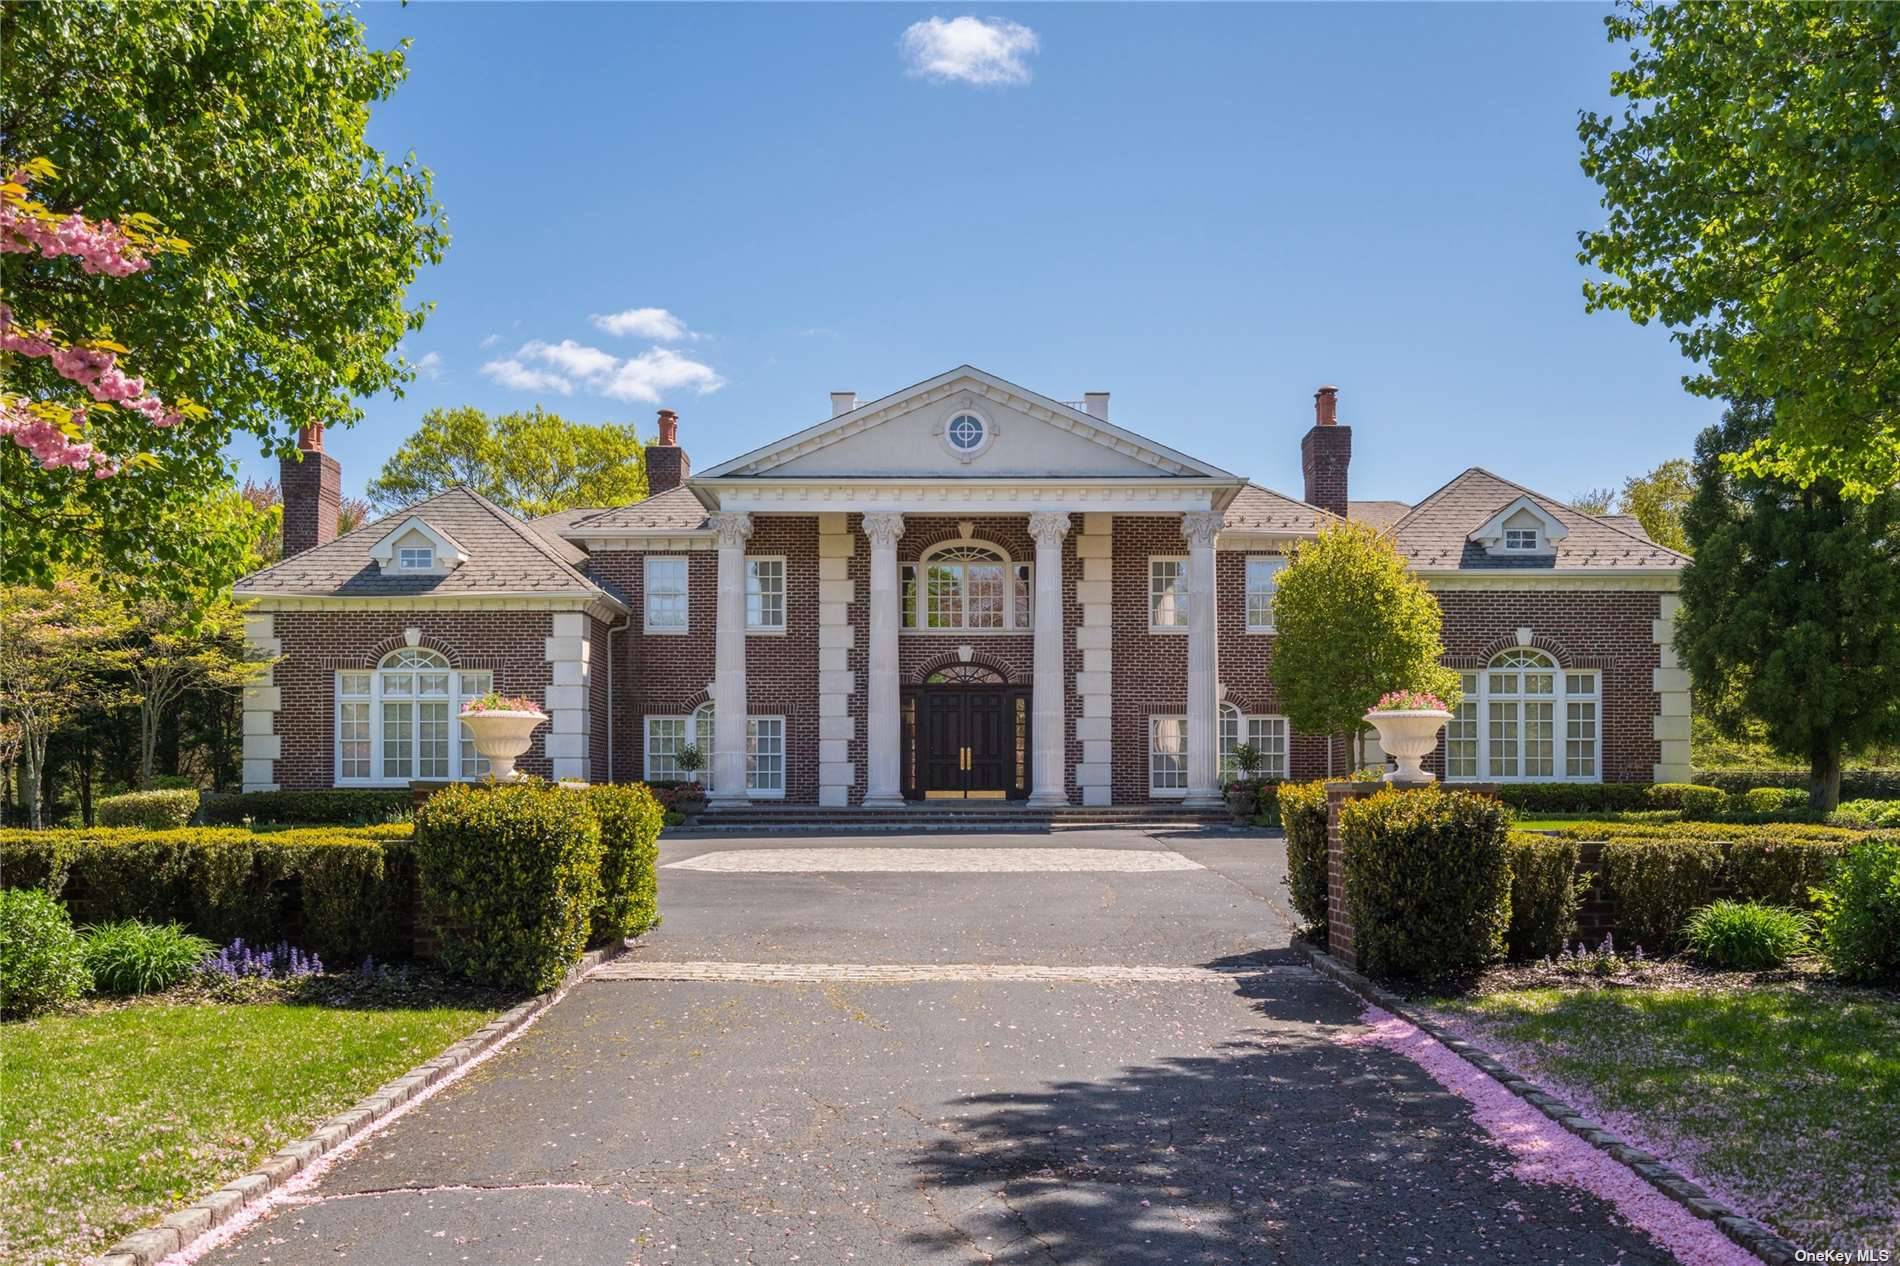 In The Renowned Village Of Old Westbury, Where Decades Of Notables Built Their Magnificent Gold Coast Mansions, Came The Architectural Inspiration To Create This Custom, Modern Day Masterpiece.